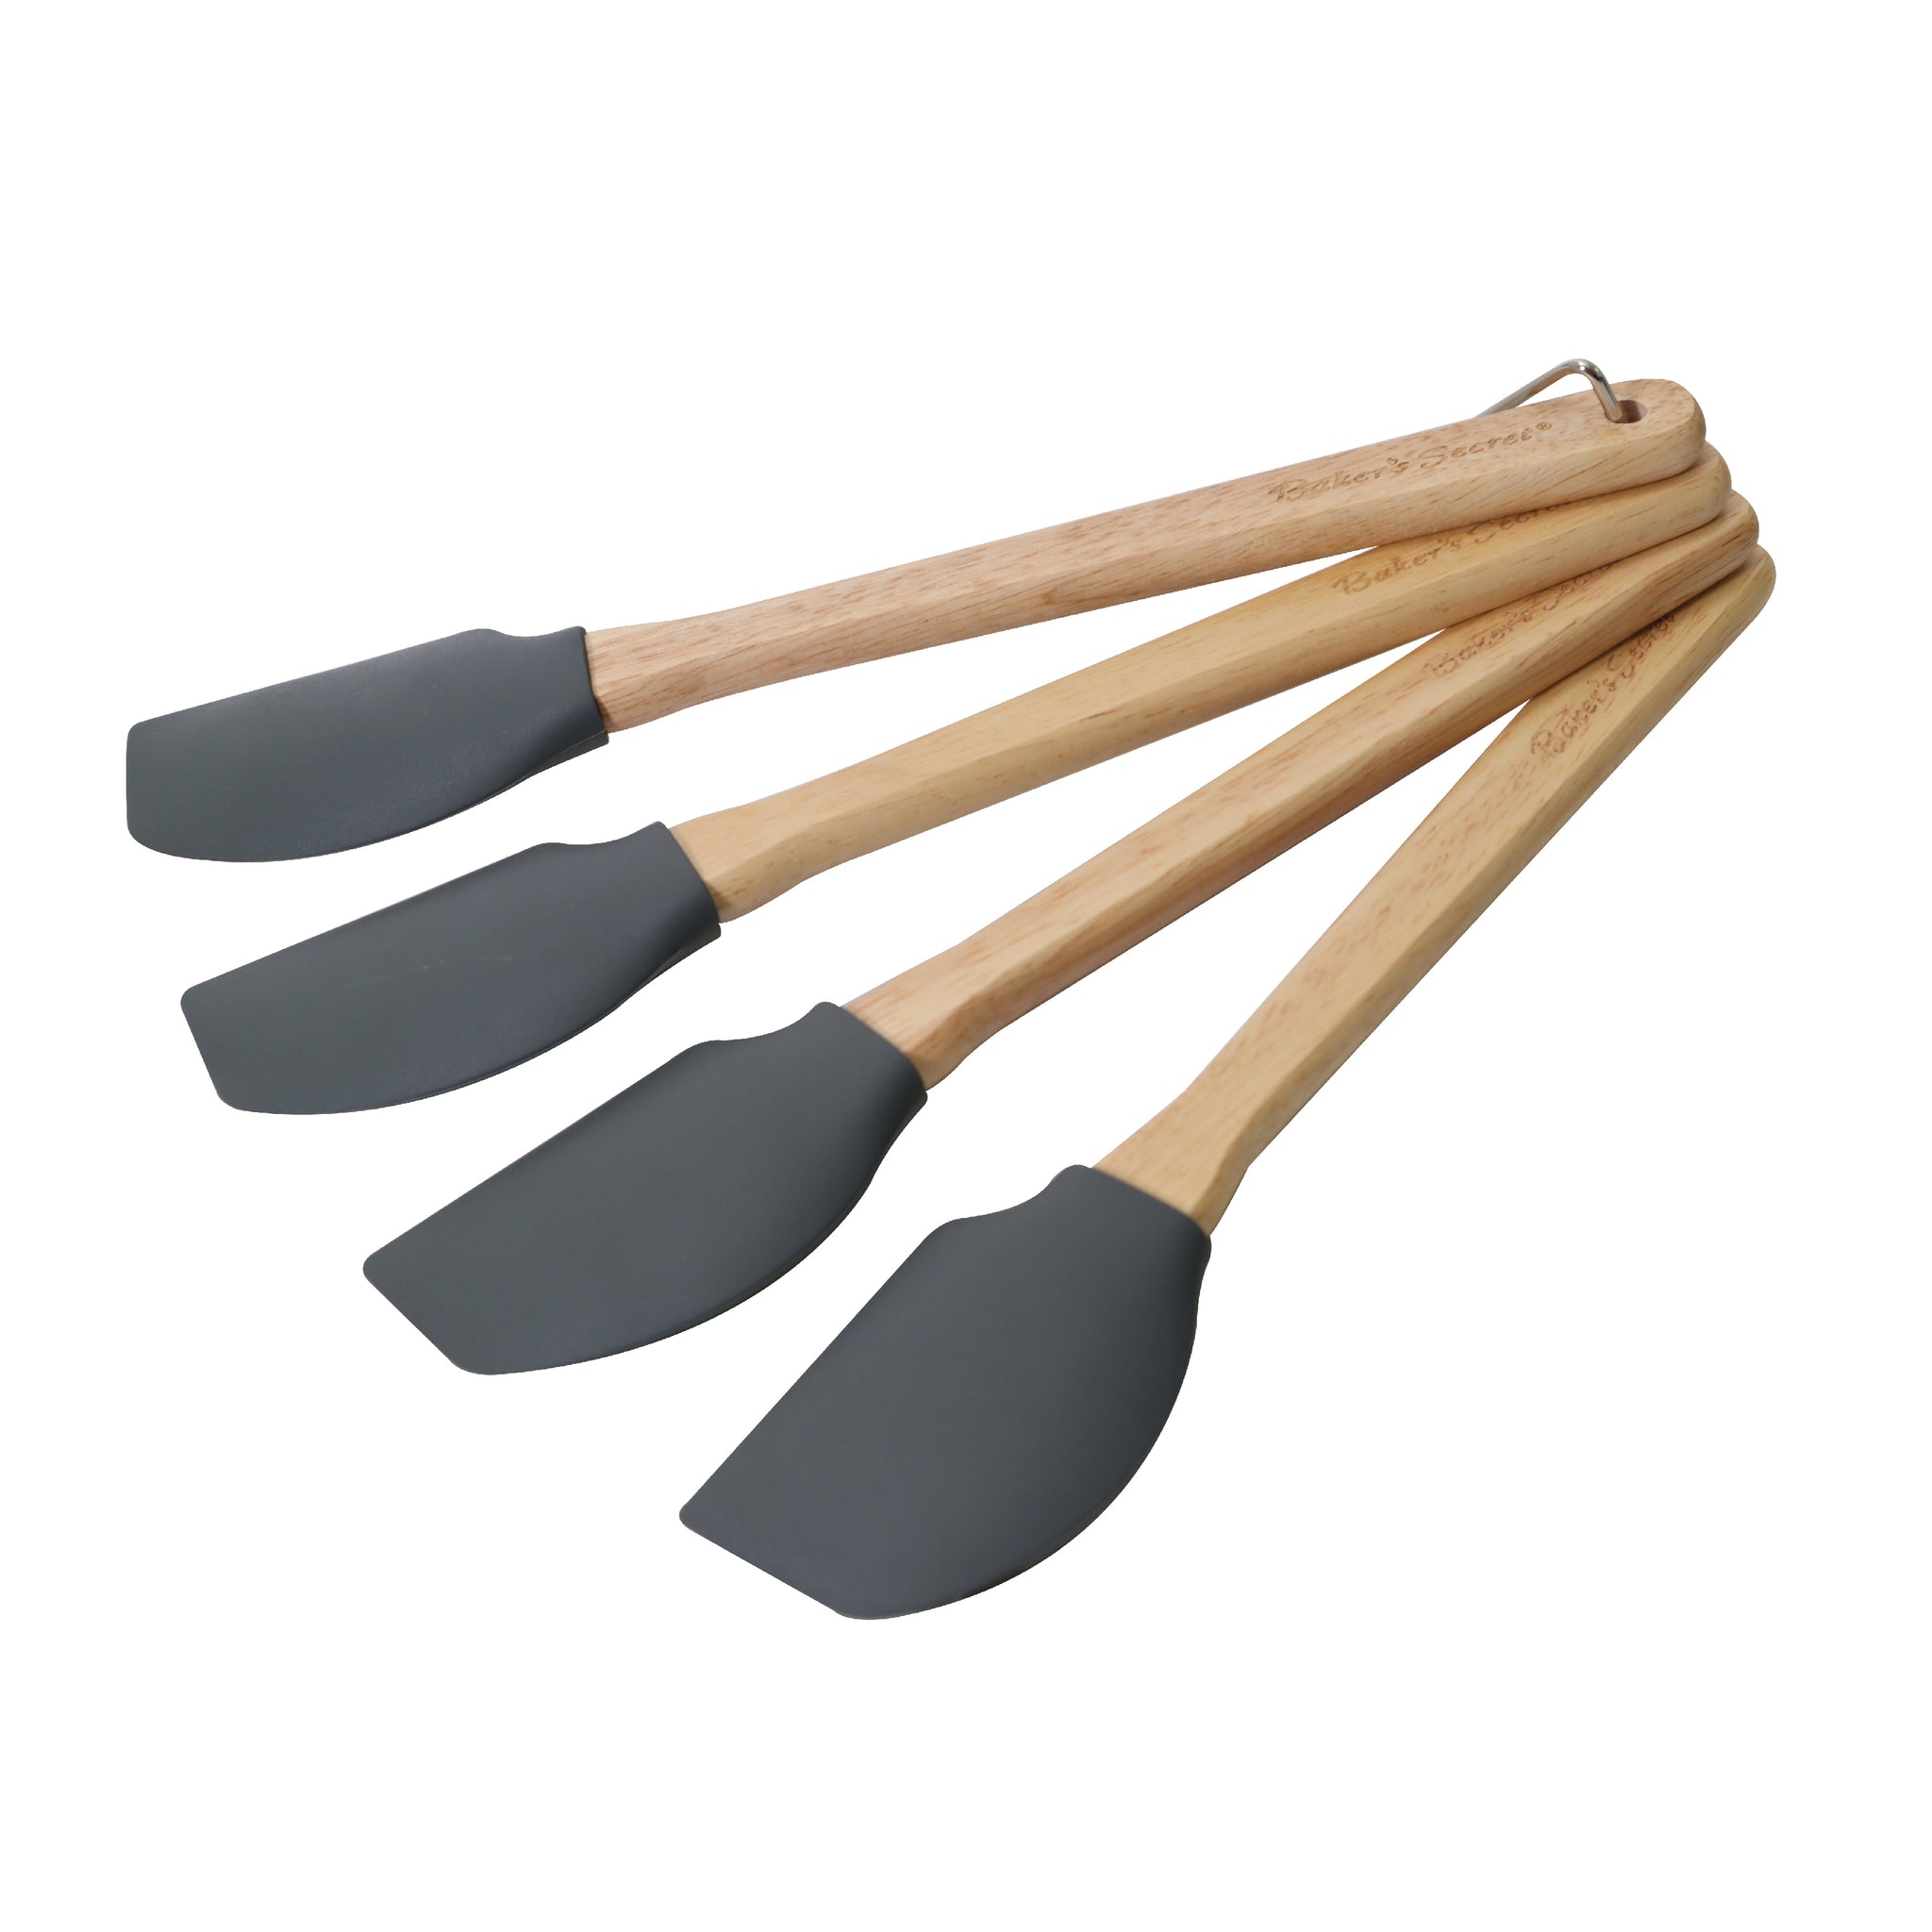 12" Silicone Spatula Set of 4 Grey Cookware Accessories - Baker's Secret